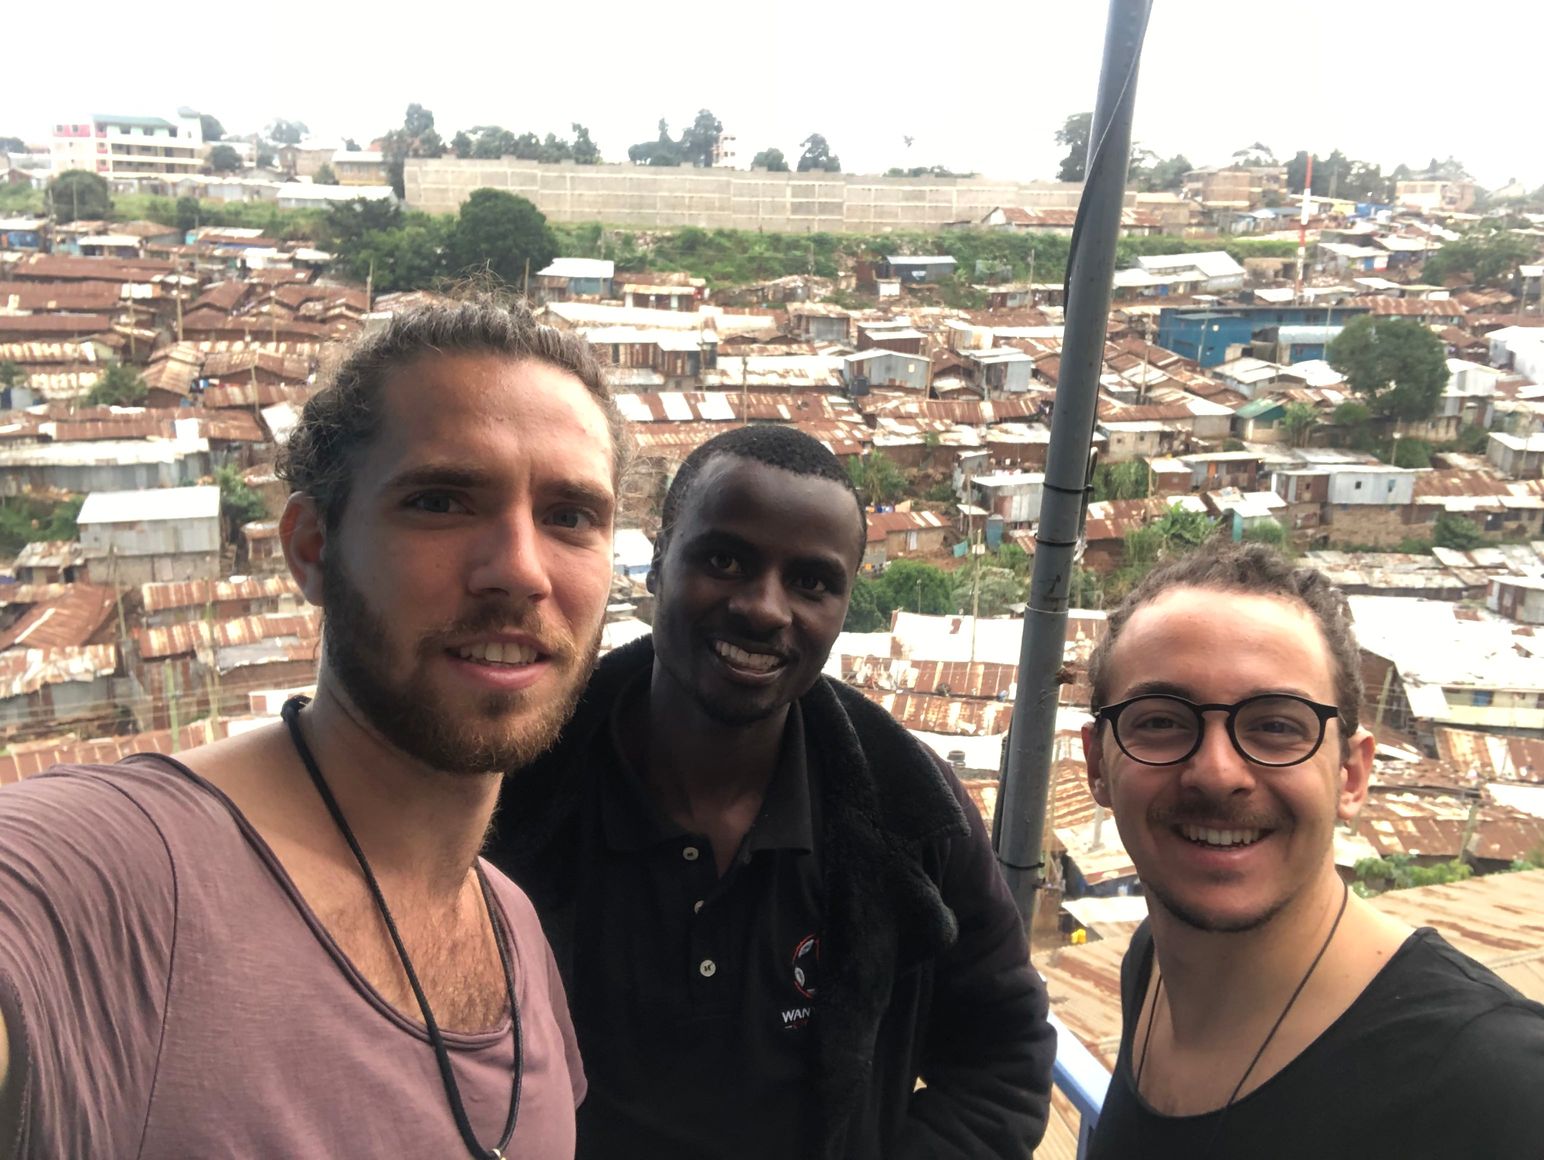 Visiting Kibera Slum with the tour guide Kevin